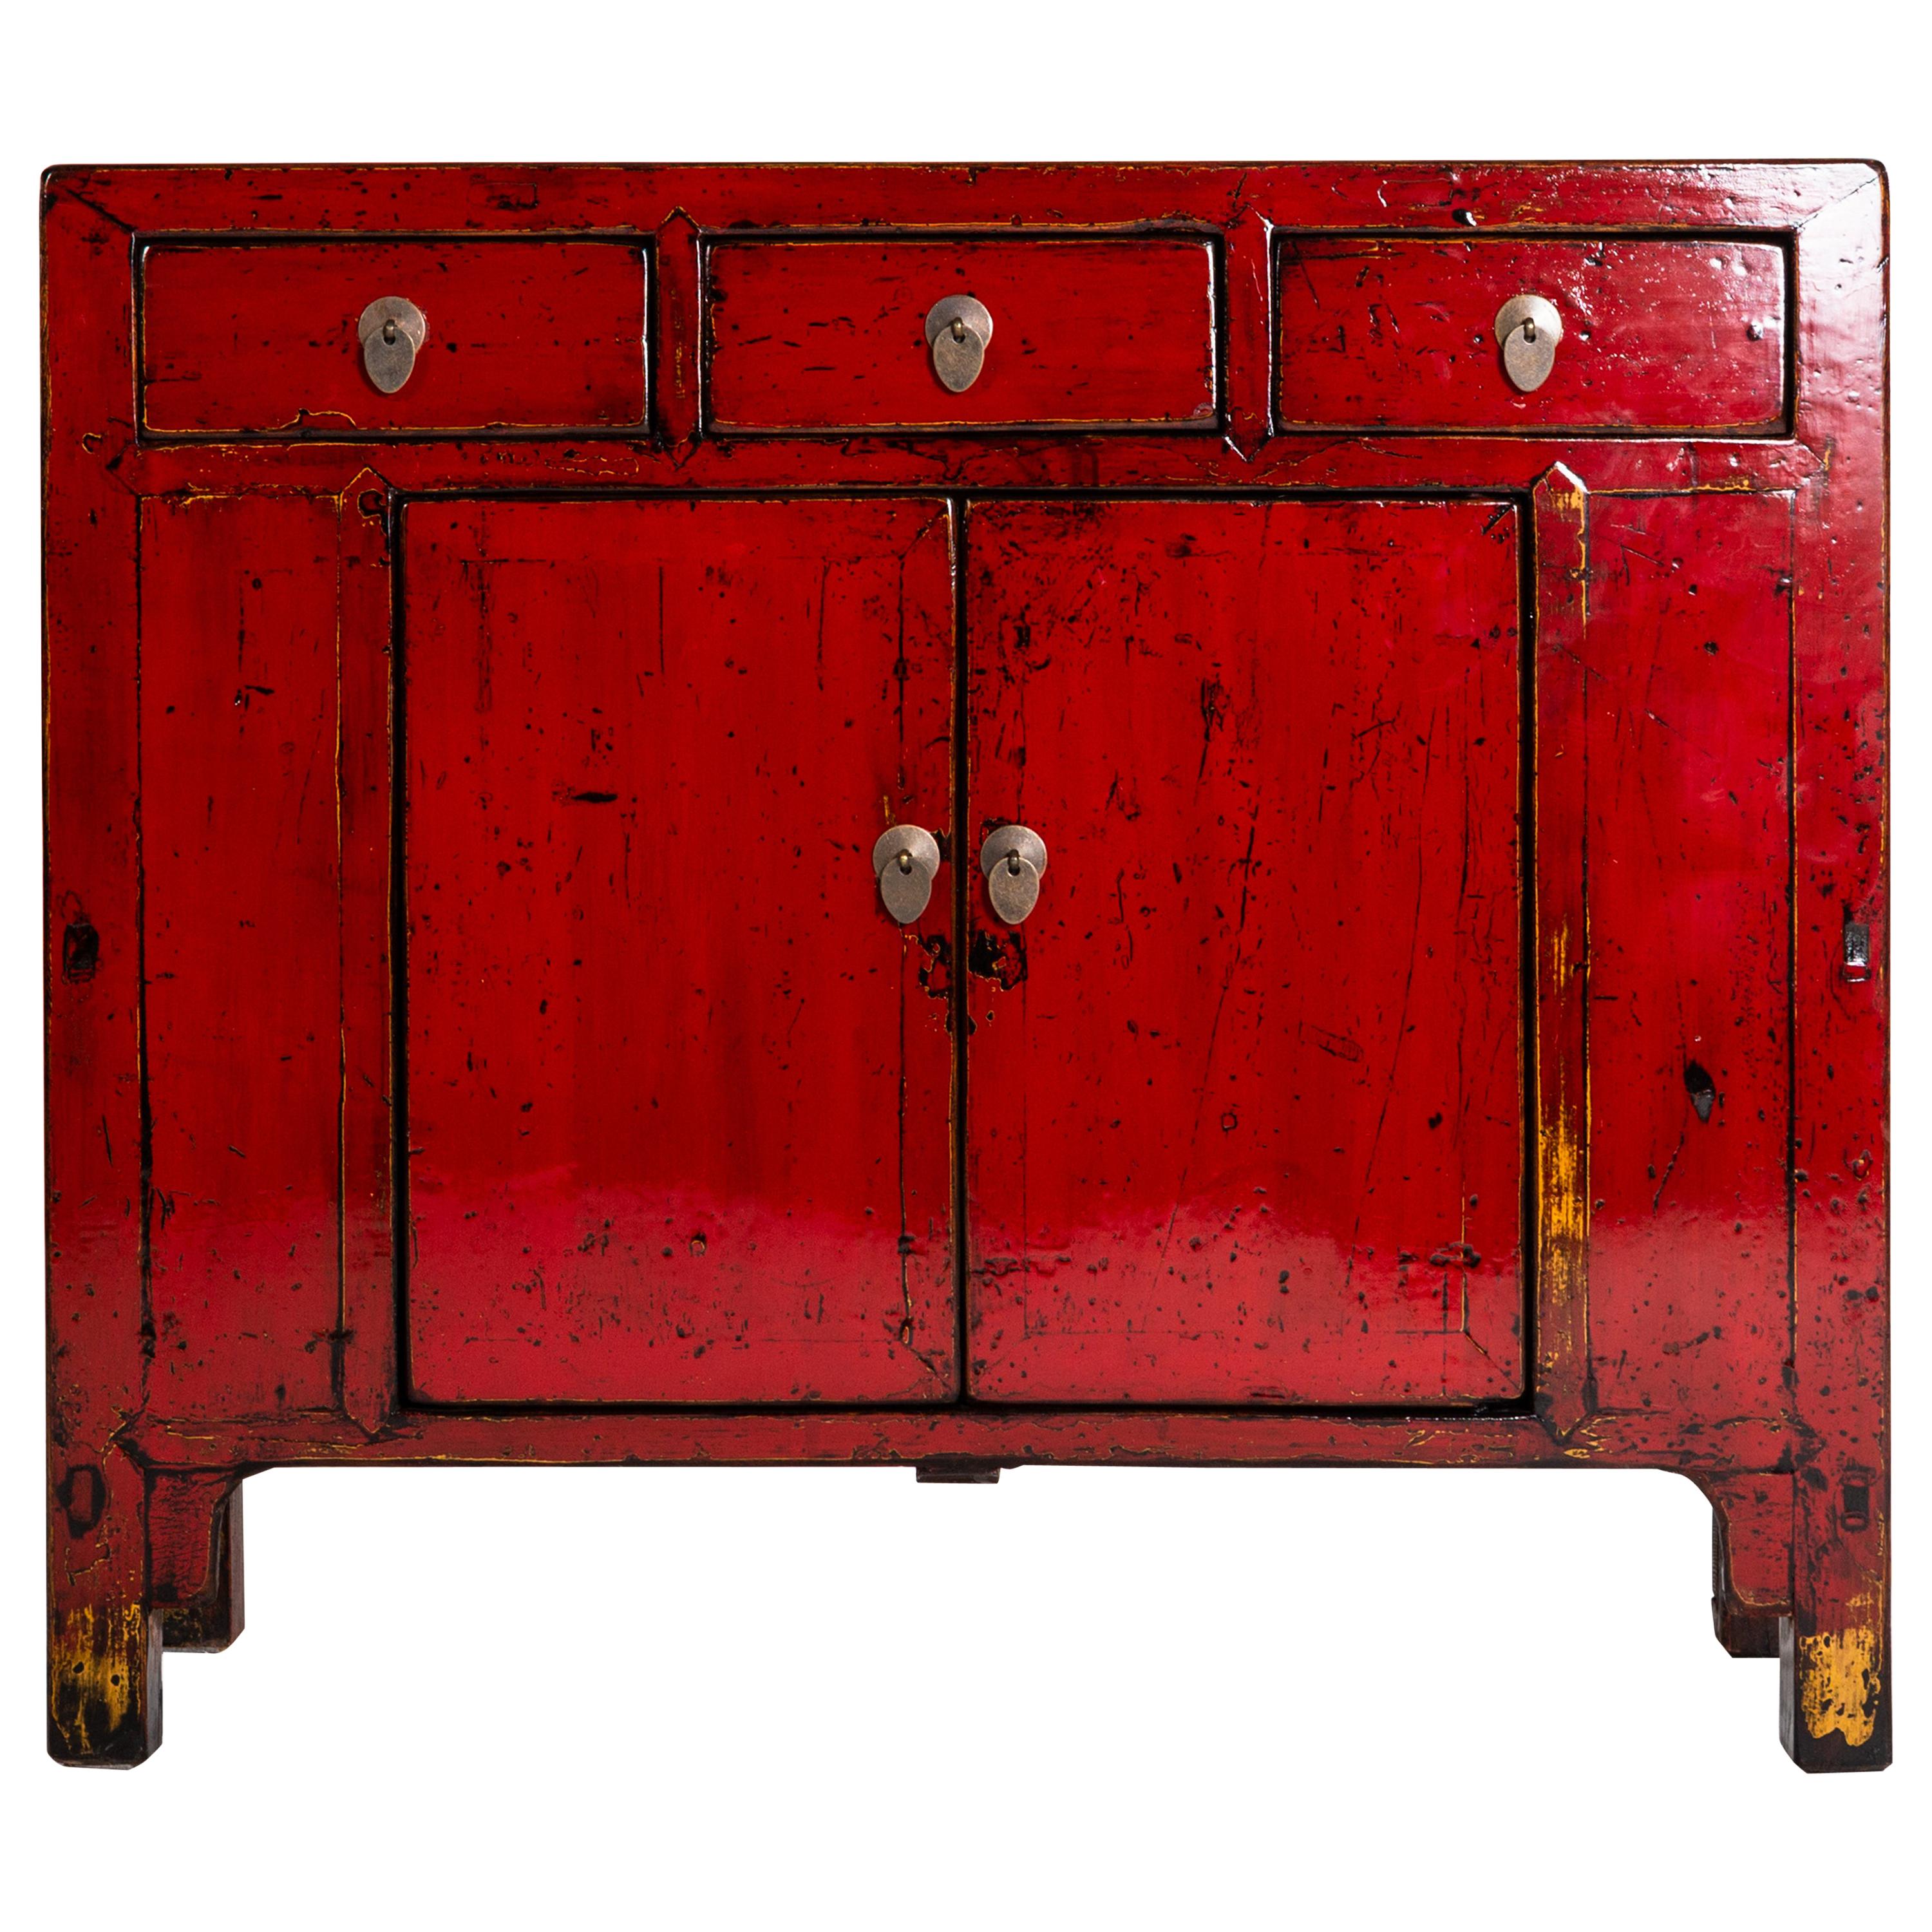 Red Lacquer Chinese Cabinet with Three Drawers and a Pair of Doors